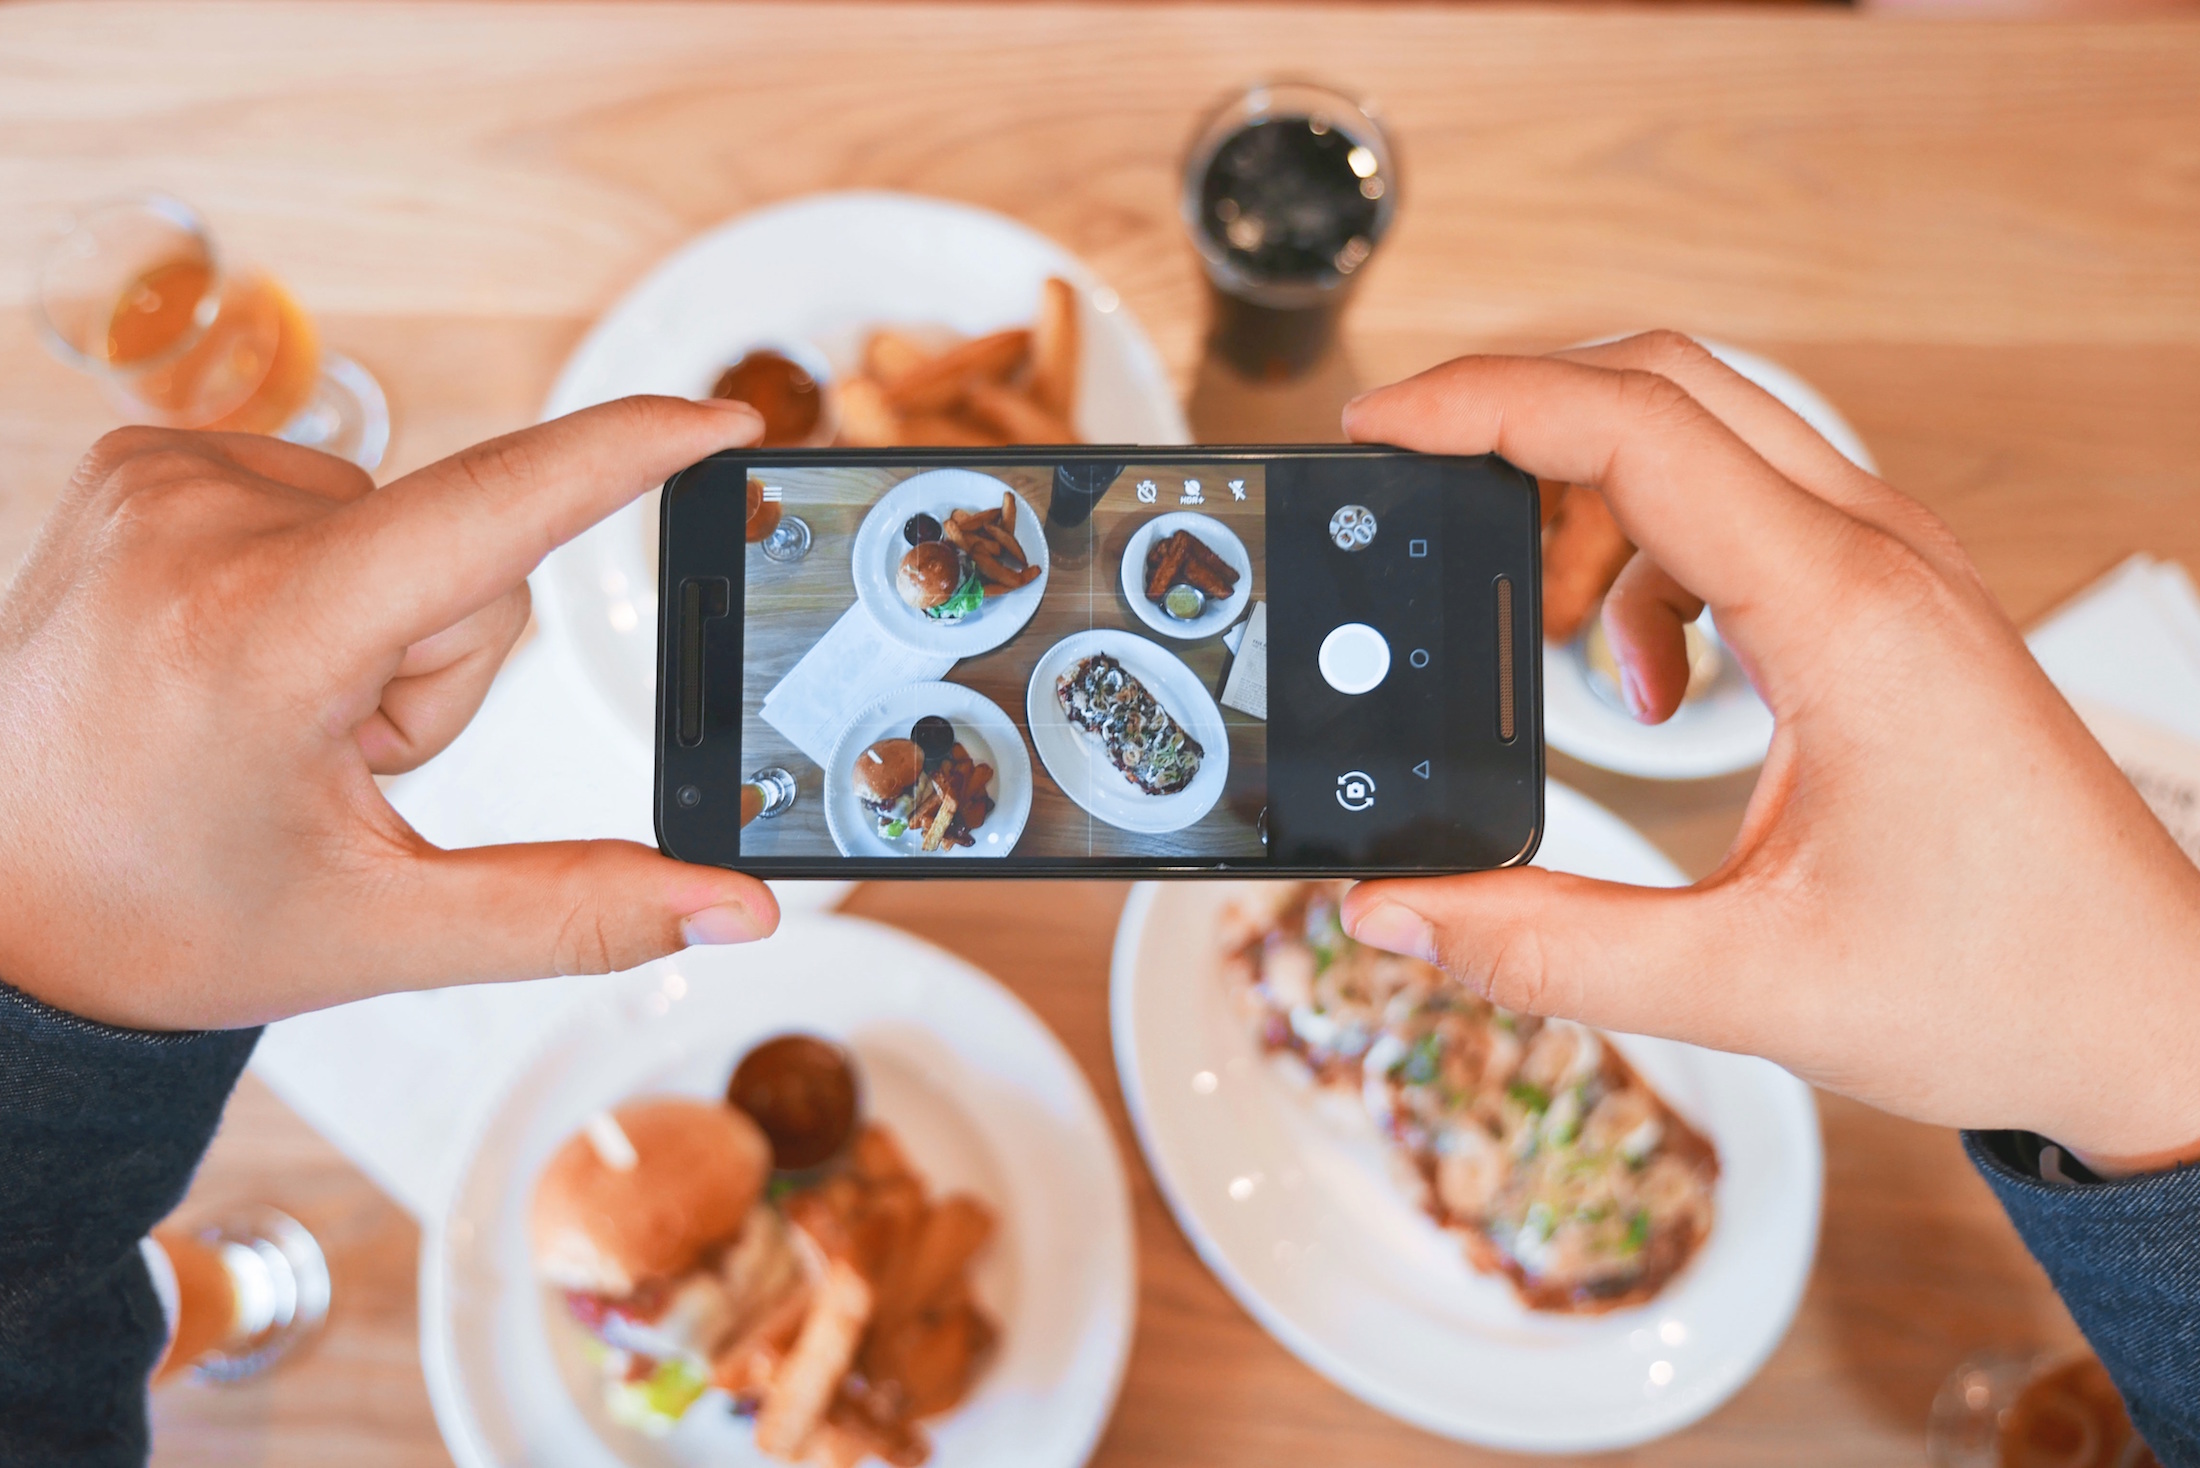 Taking Photo of Food with Phone